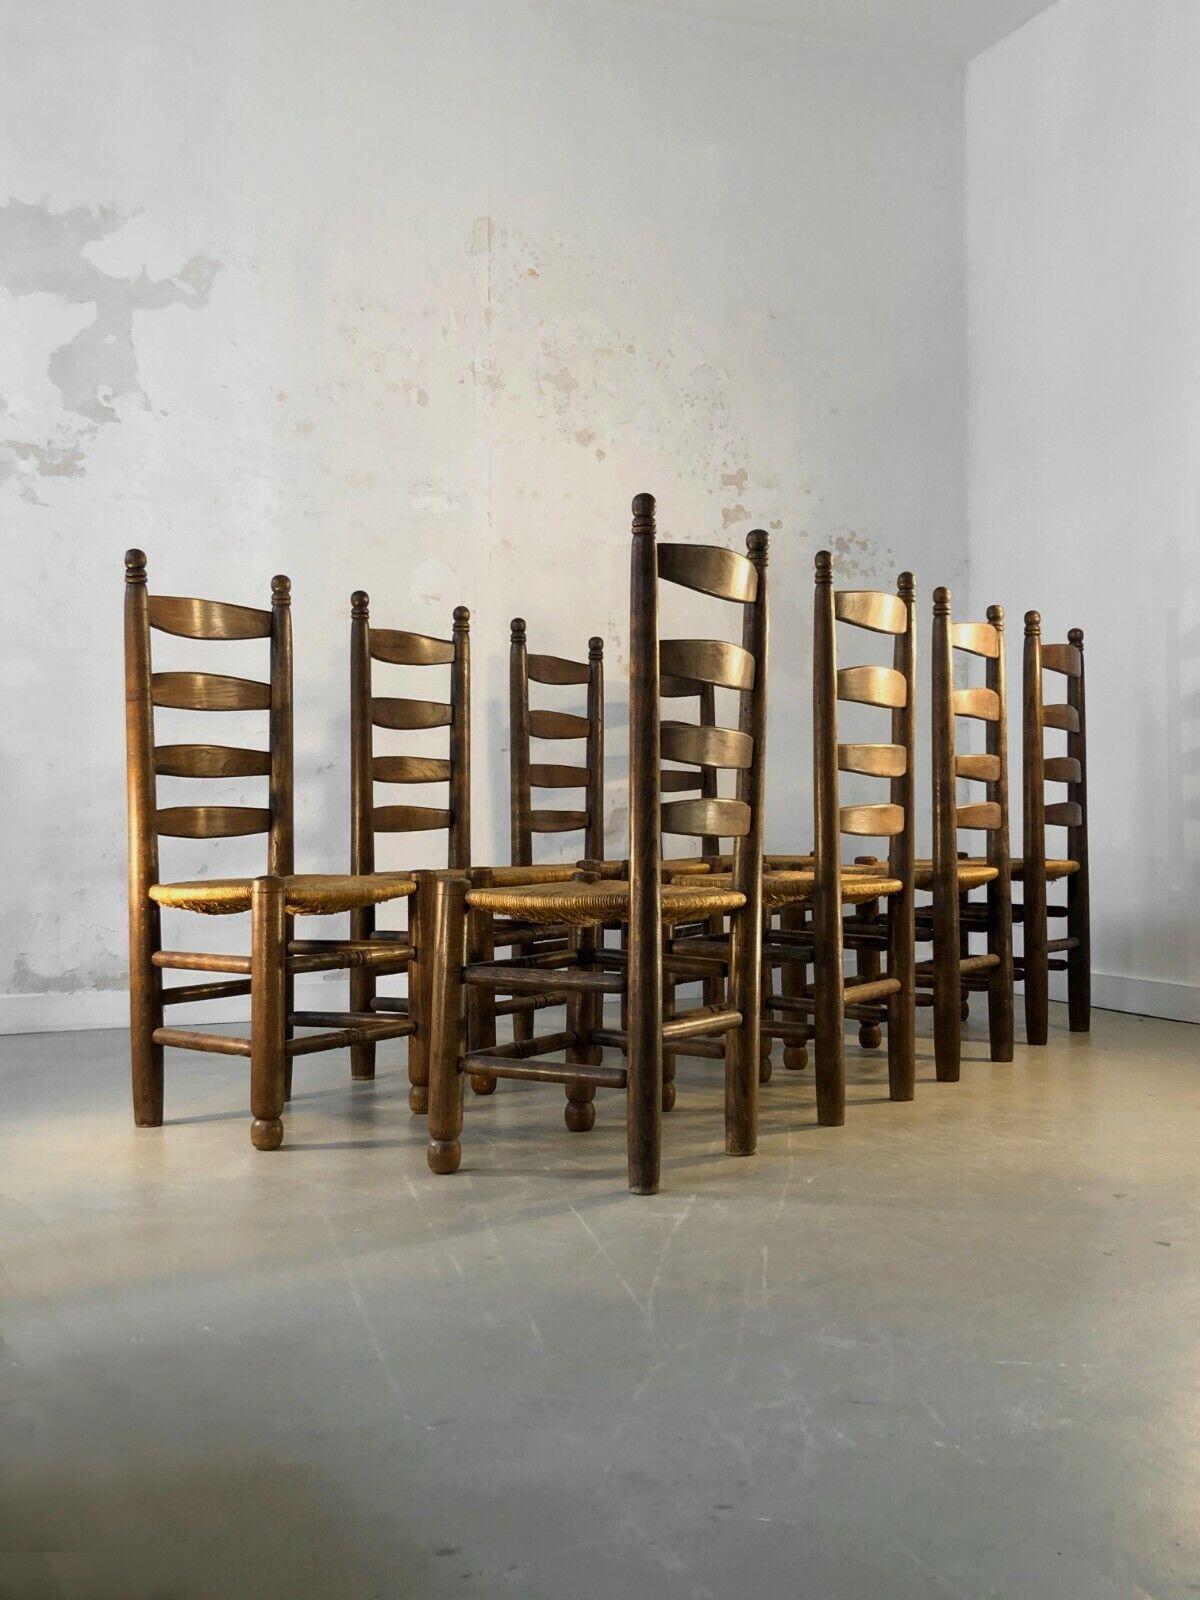 8 BRUTALIST RUSTIC MODERN Modernist CHAIRS by CHARLES DUDOUYDT, France 1950 For Sale 6